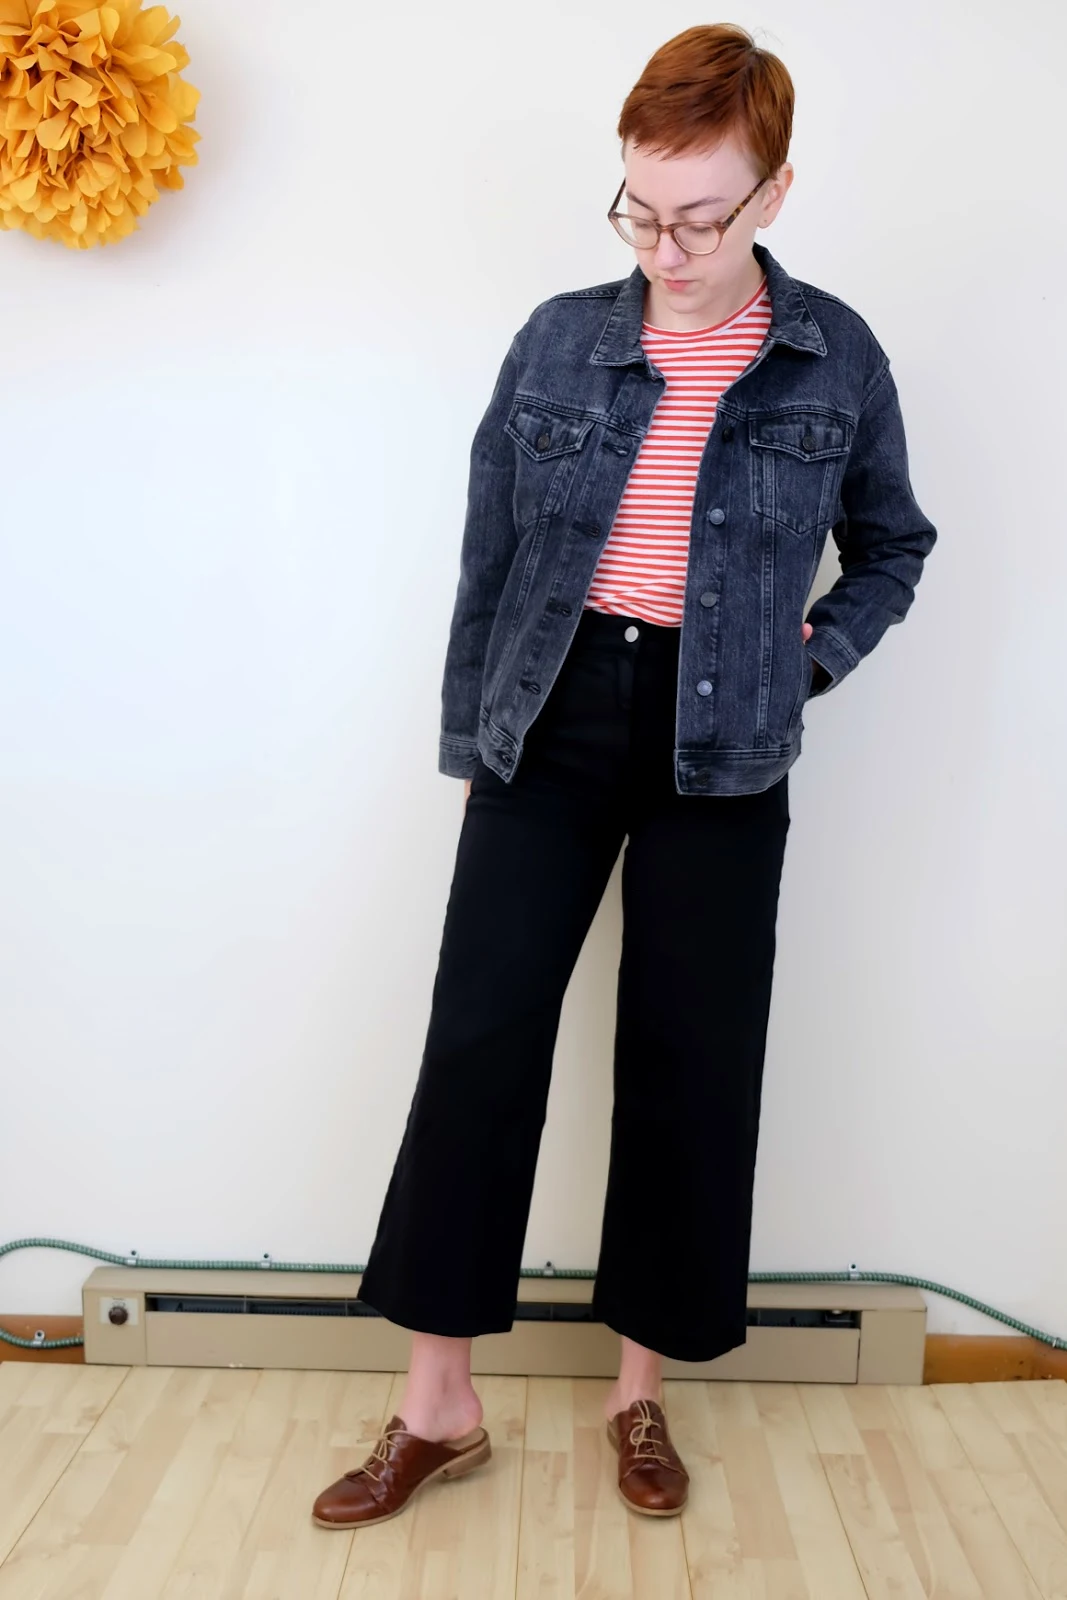 Leah wears a washed black Everlane jacket with black pants and a red striped shirt - Everlane Denim Jacket Review